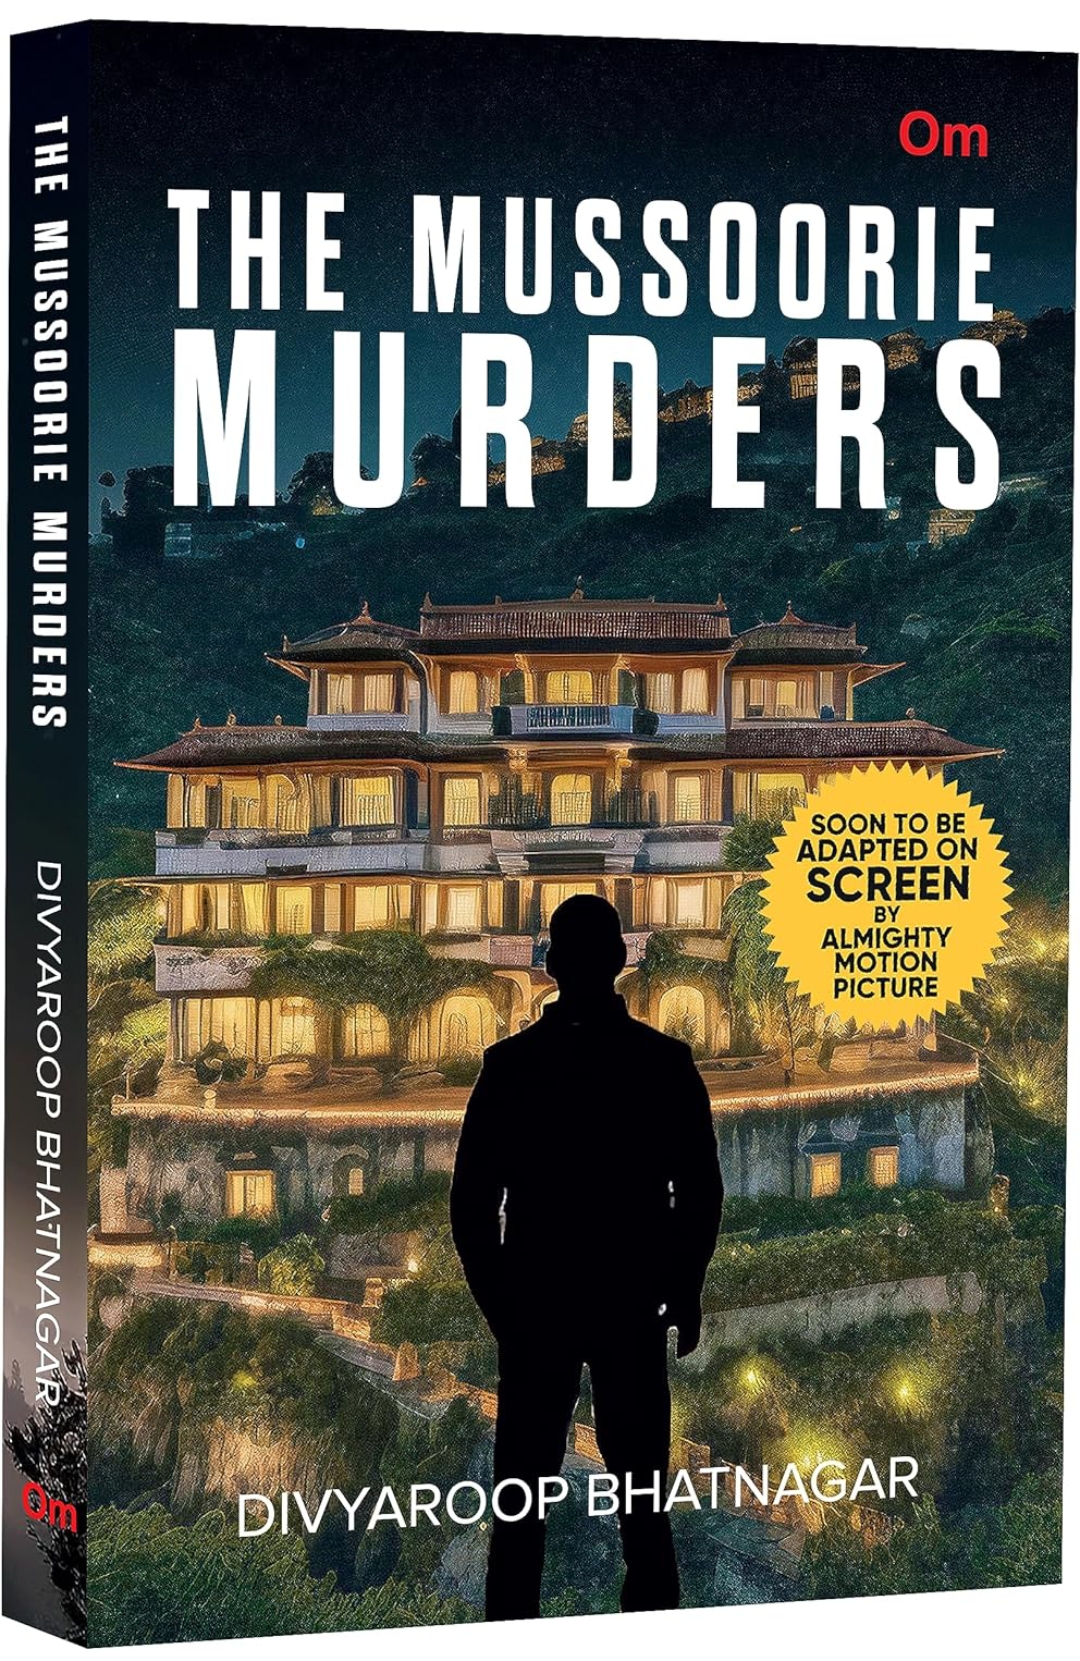 The Mussoorie Murders – Book Review